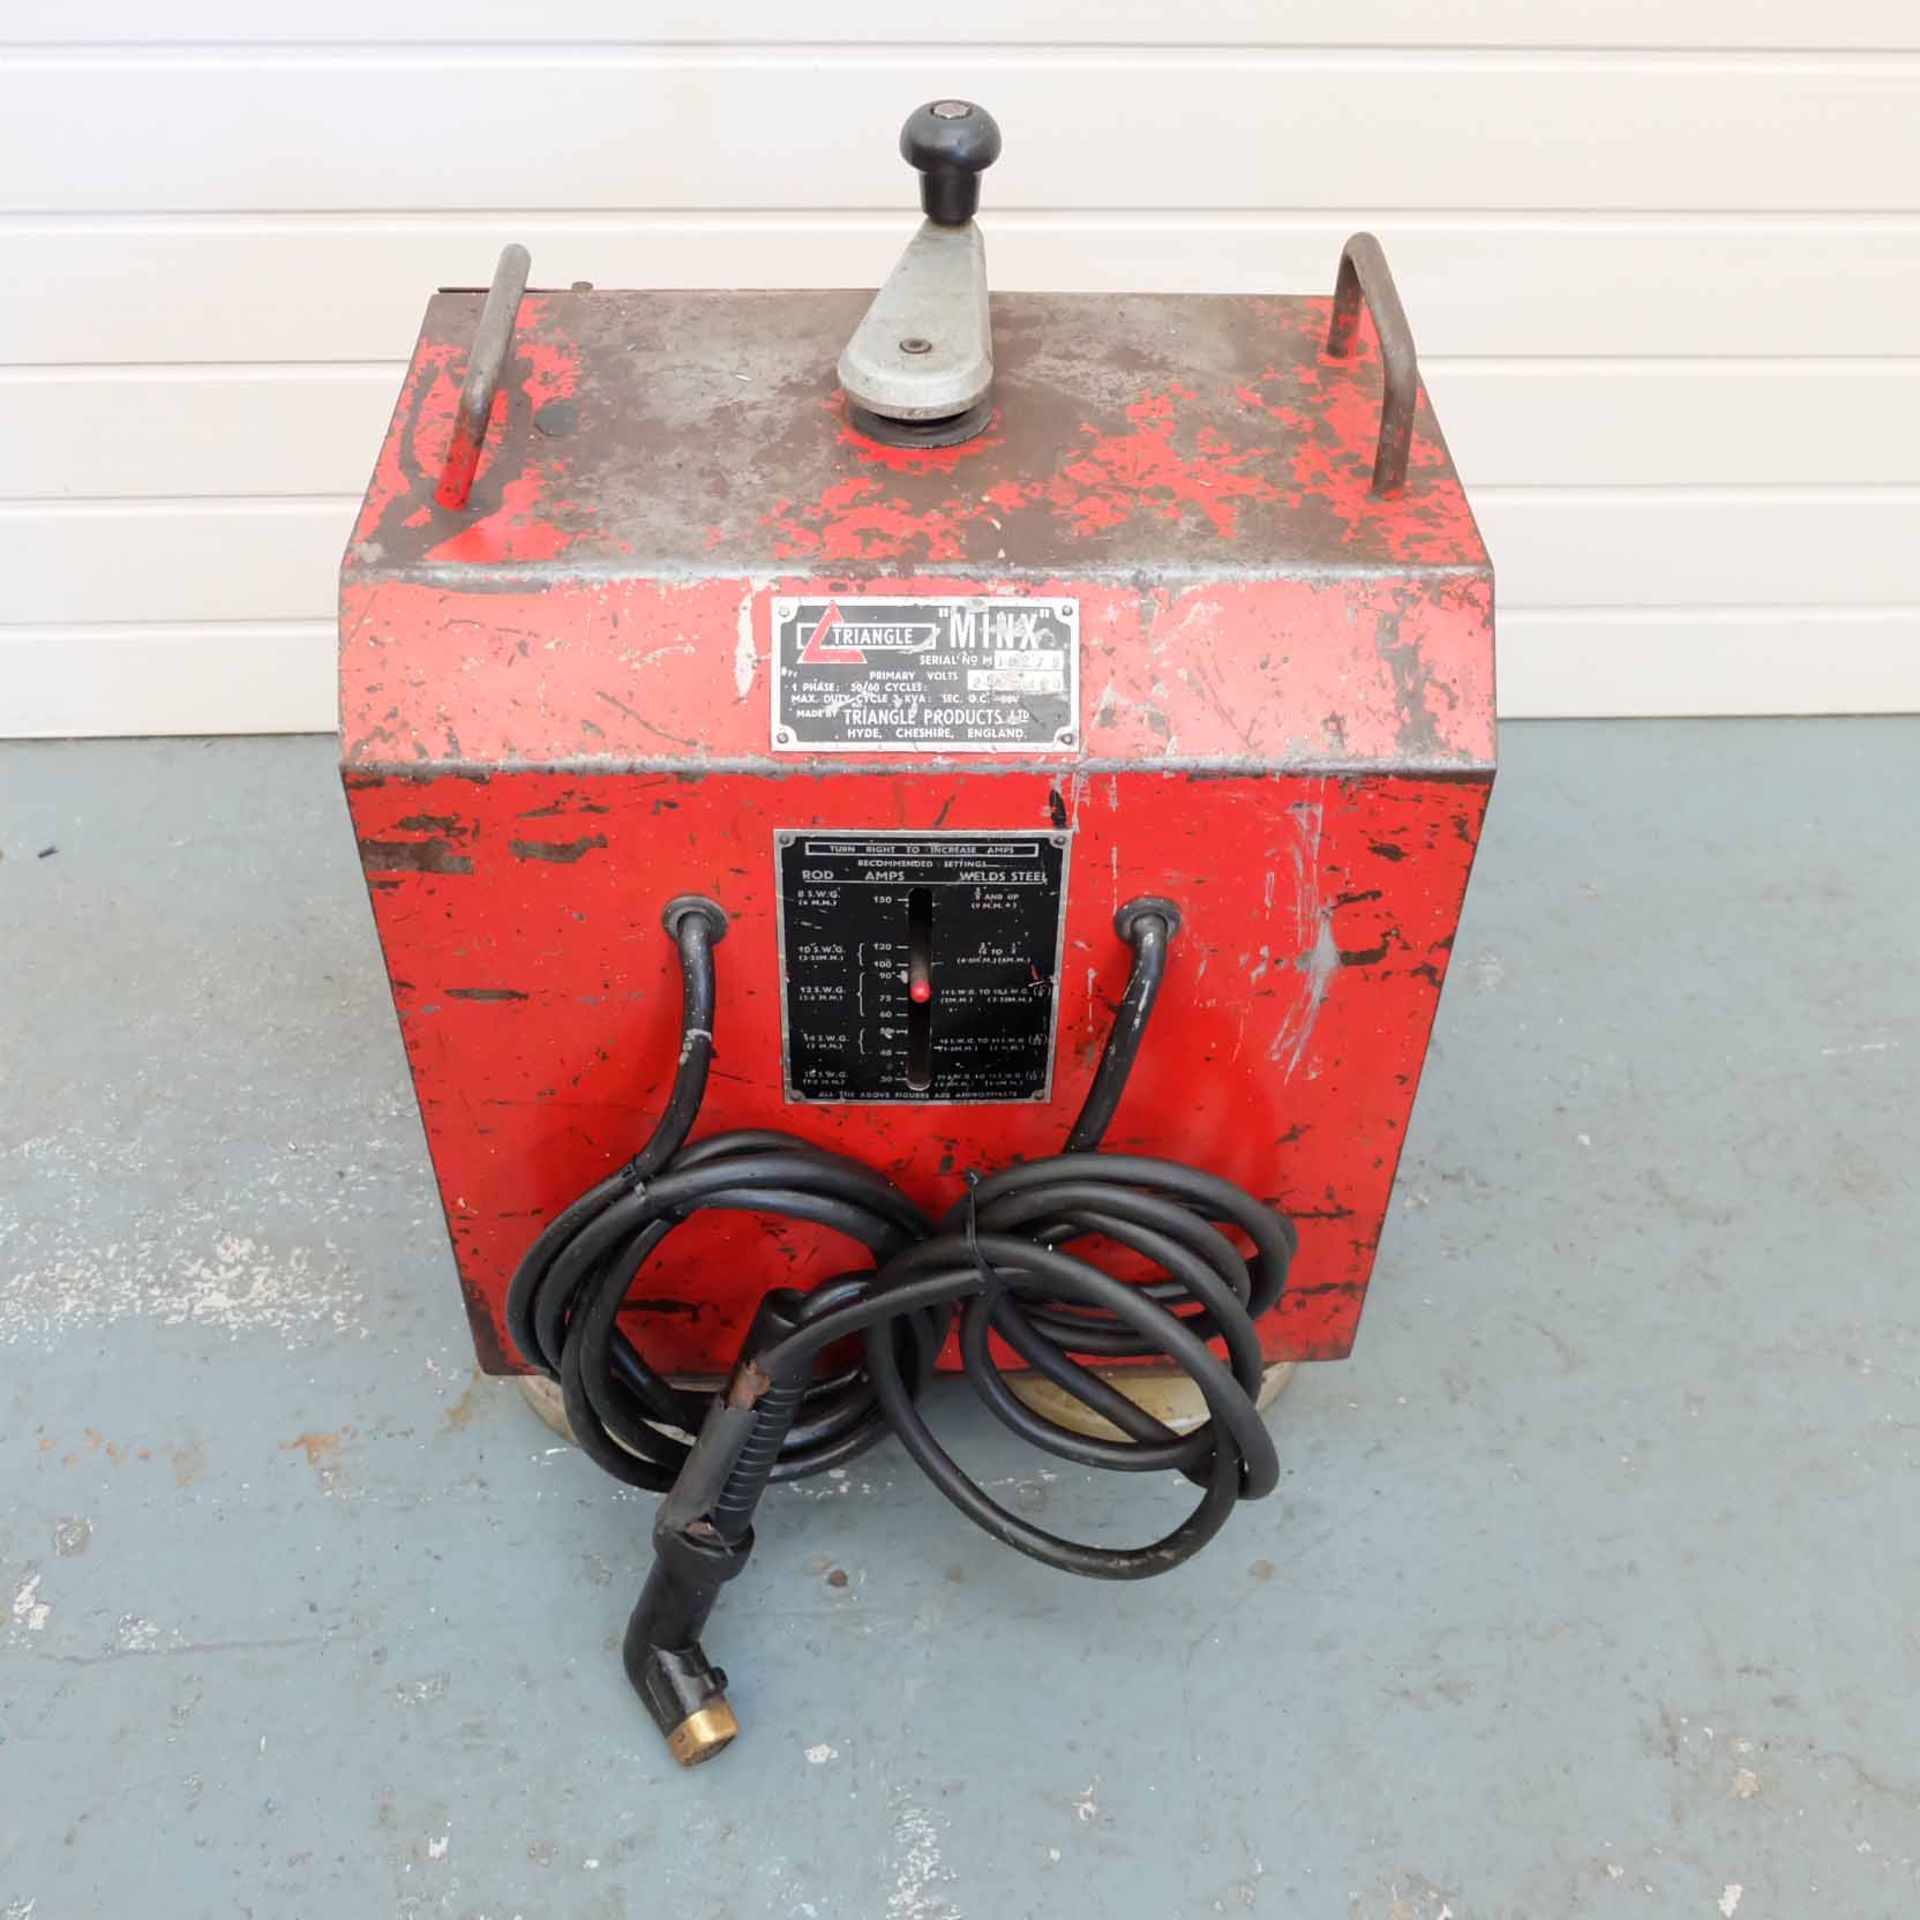 Triangle 'Minx' 1 Phase Stick Welder. Range 30 - 50Amps. Max Duty Cycle 3KVA. Primary Volts 200 - 48 - Image 2 of 7